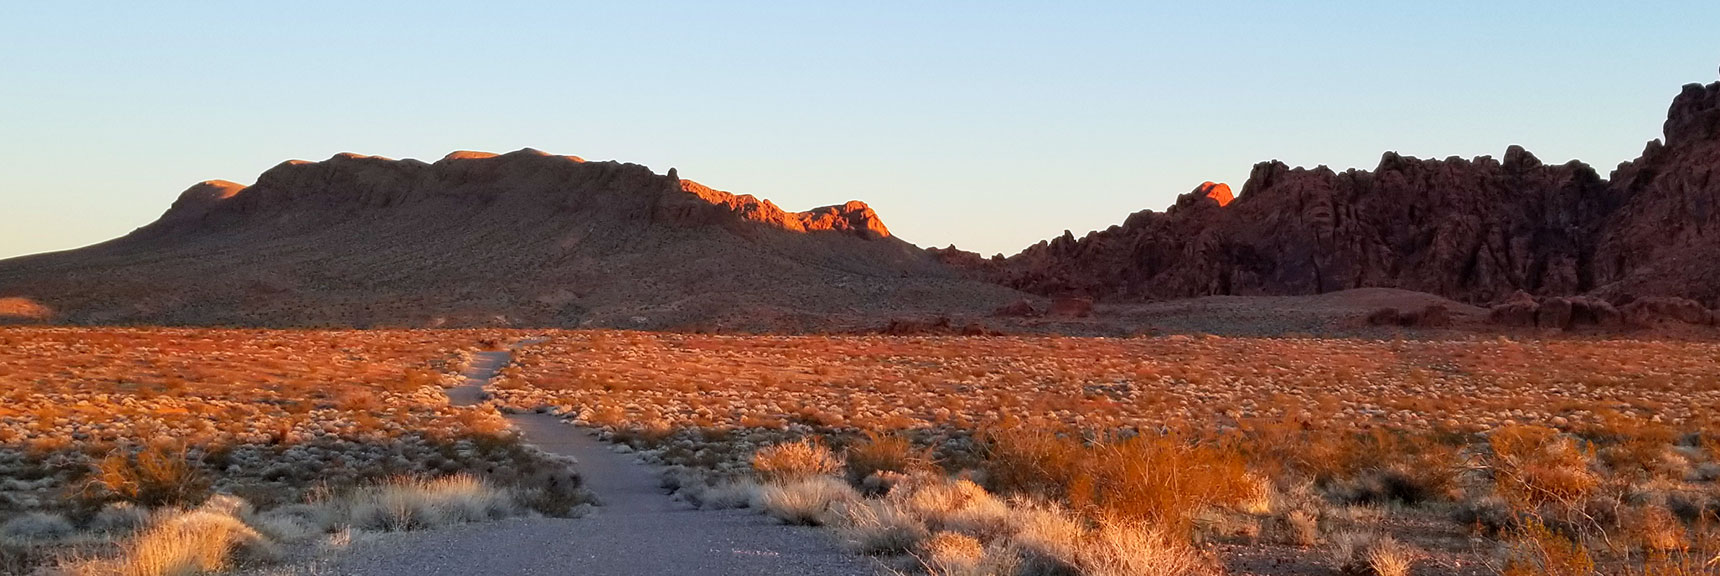 End of the Graded Road for Prospect Trail in Valley of Fire State Park, Nevada